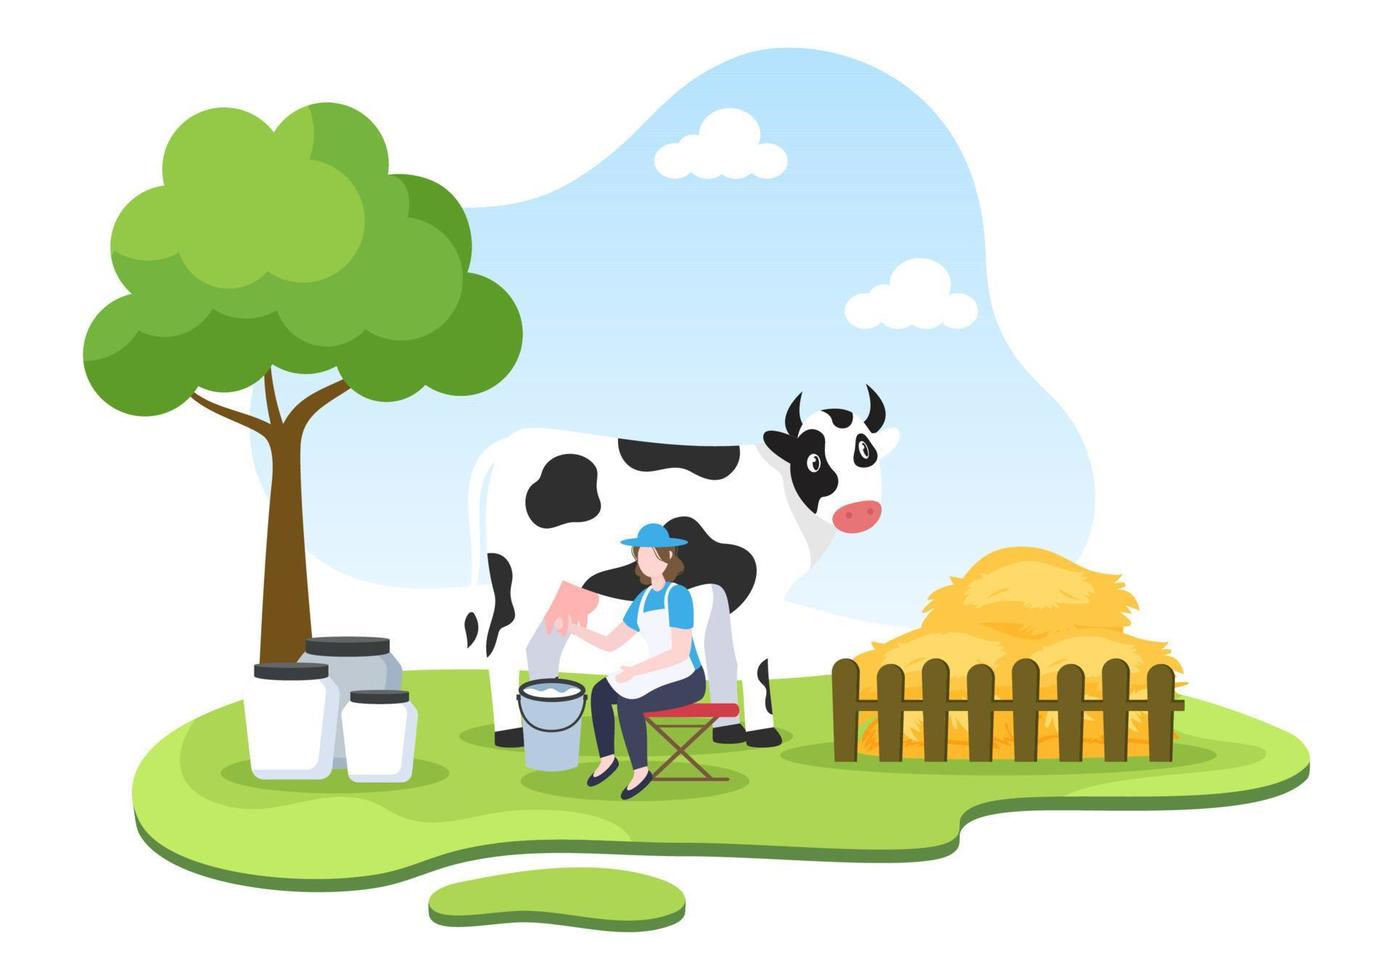 Farmers are Milking Cows to Produce or Obtain Milk with Views of Green Meadows or on Farms in an Illustration Flat Style vector